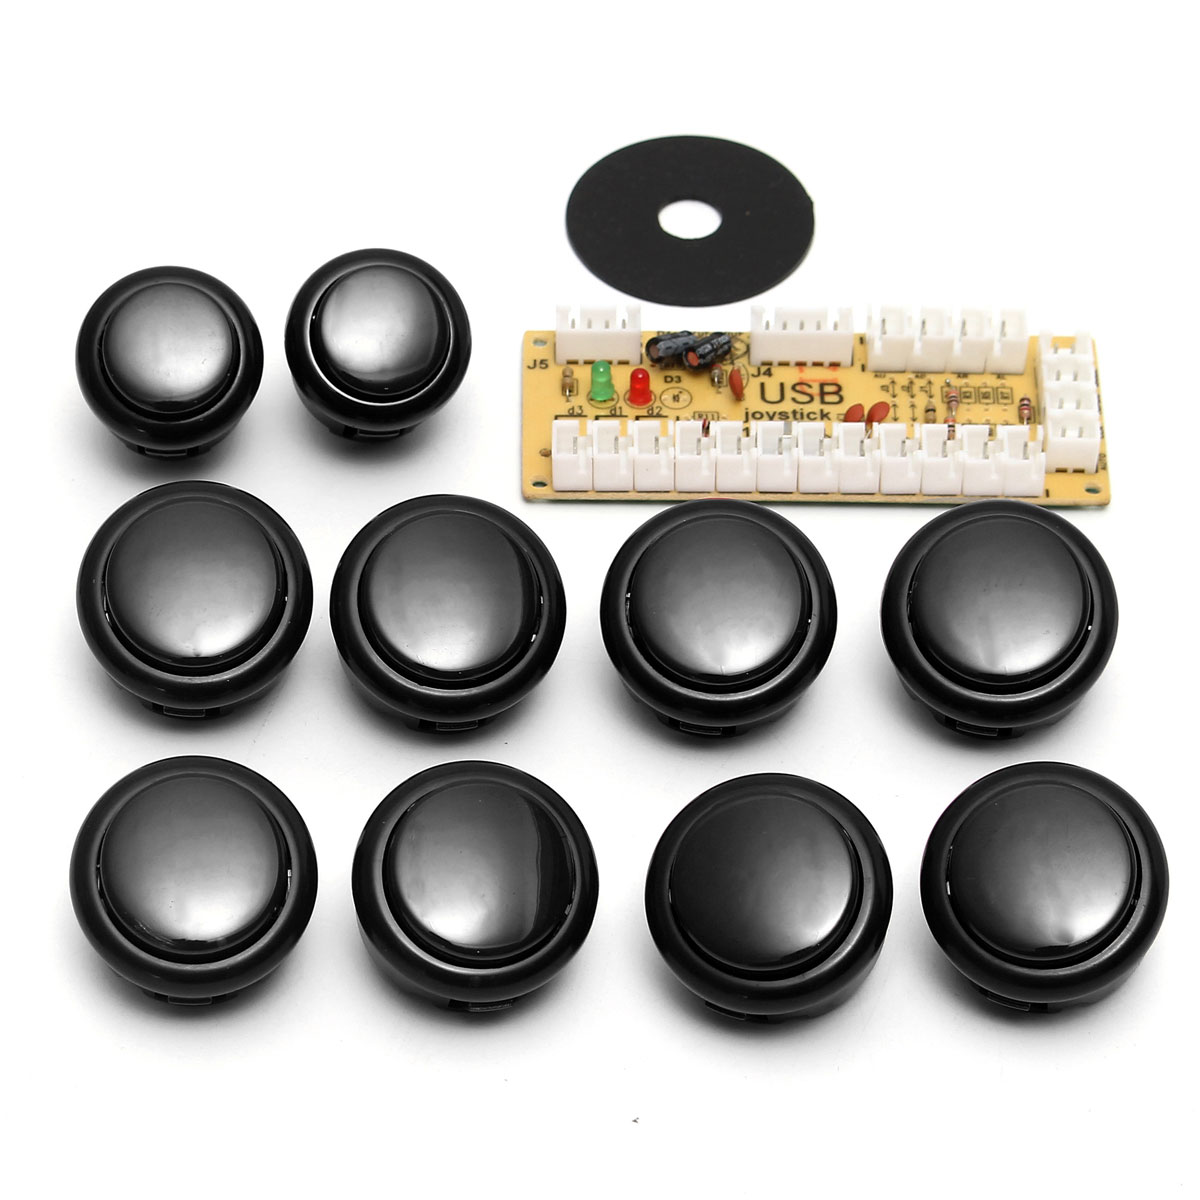 Game DIY Arcade Set Kits Replacement Parts USB Encoder to PC Joystick and Buttons 5